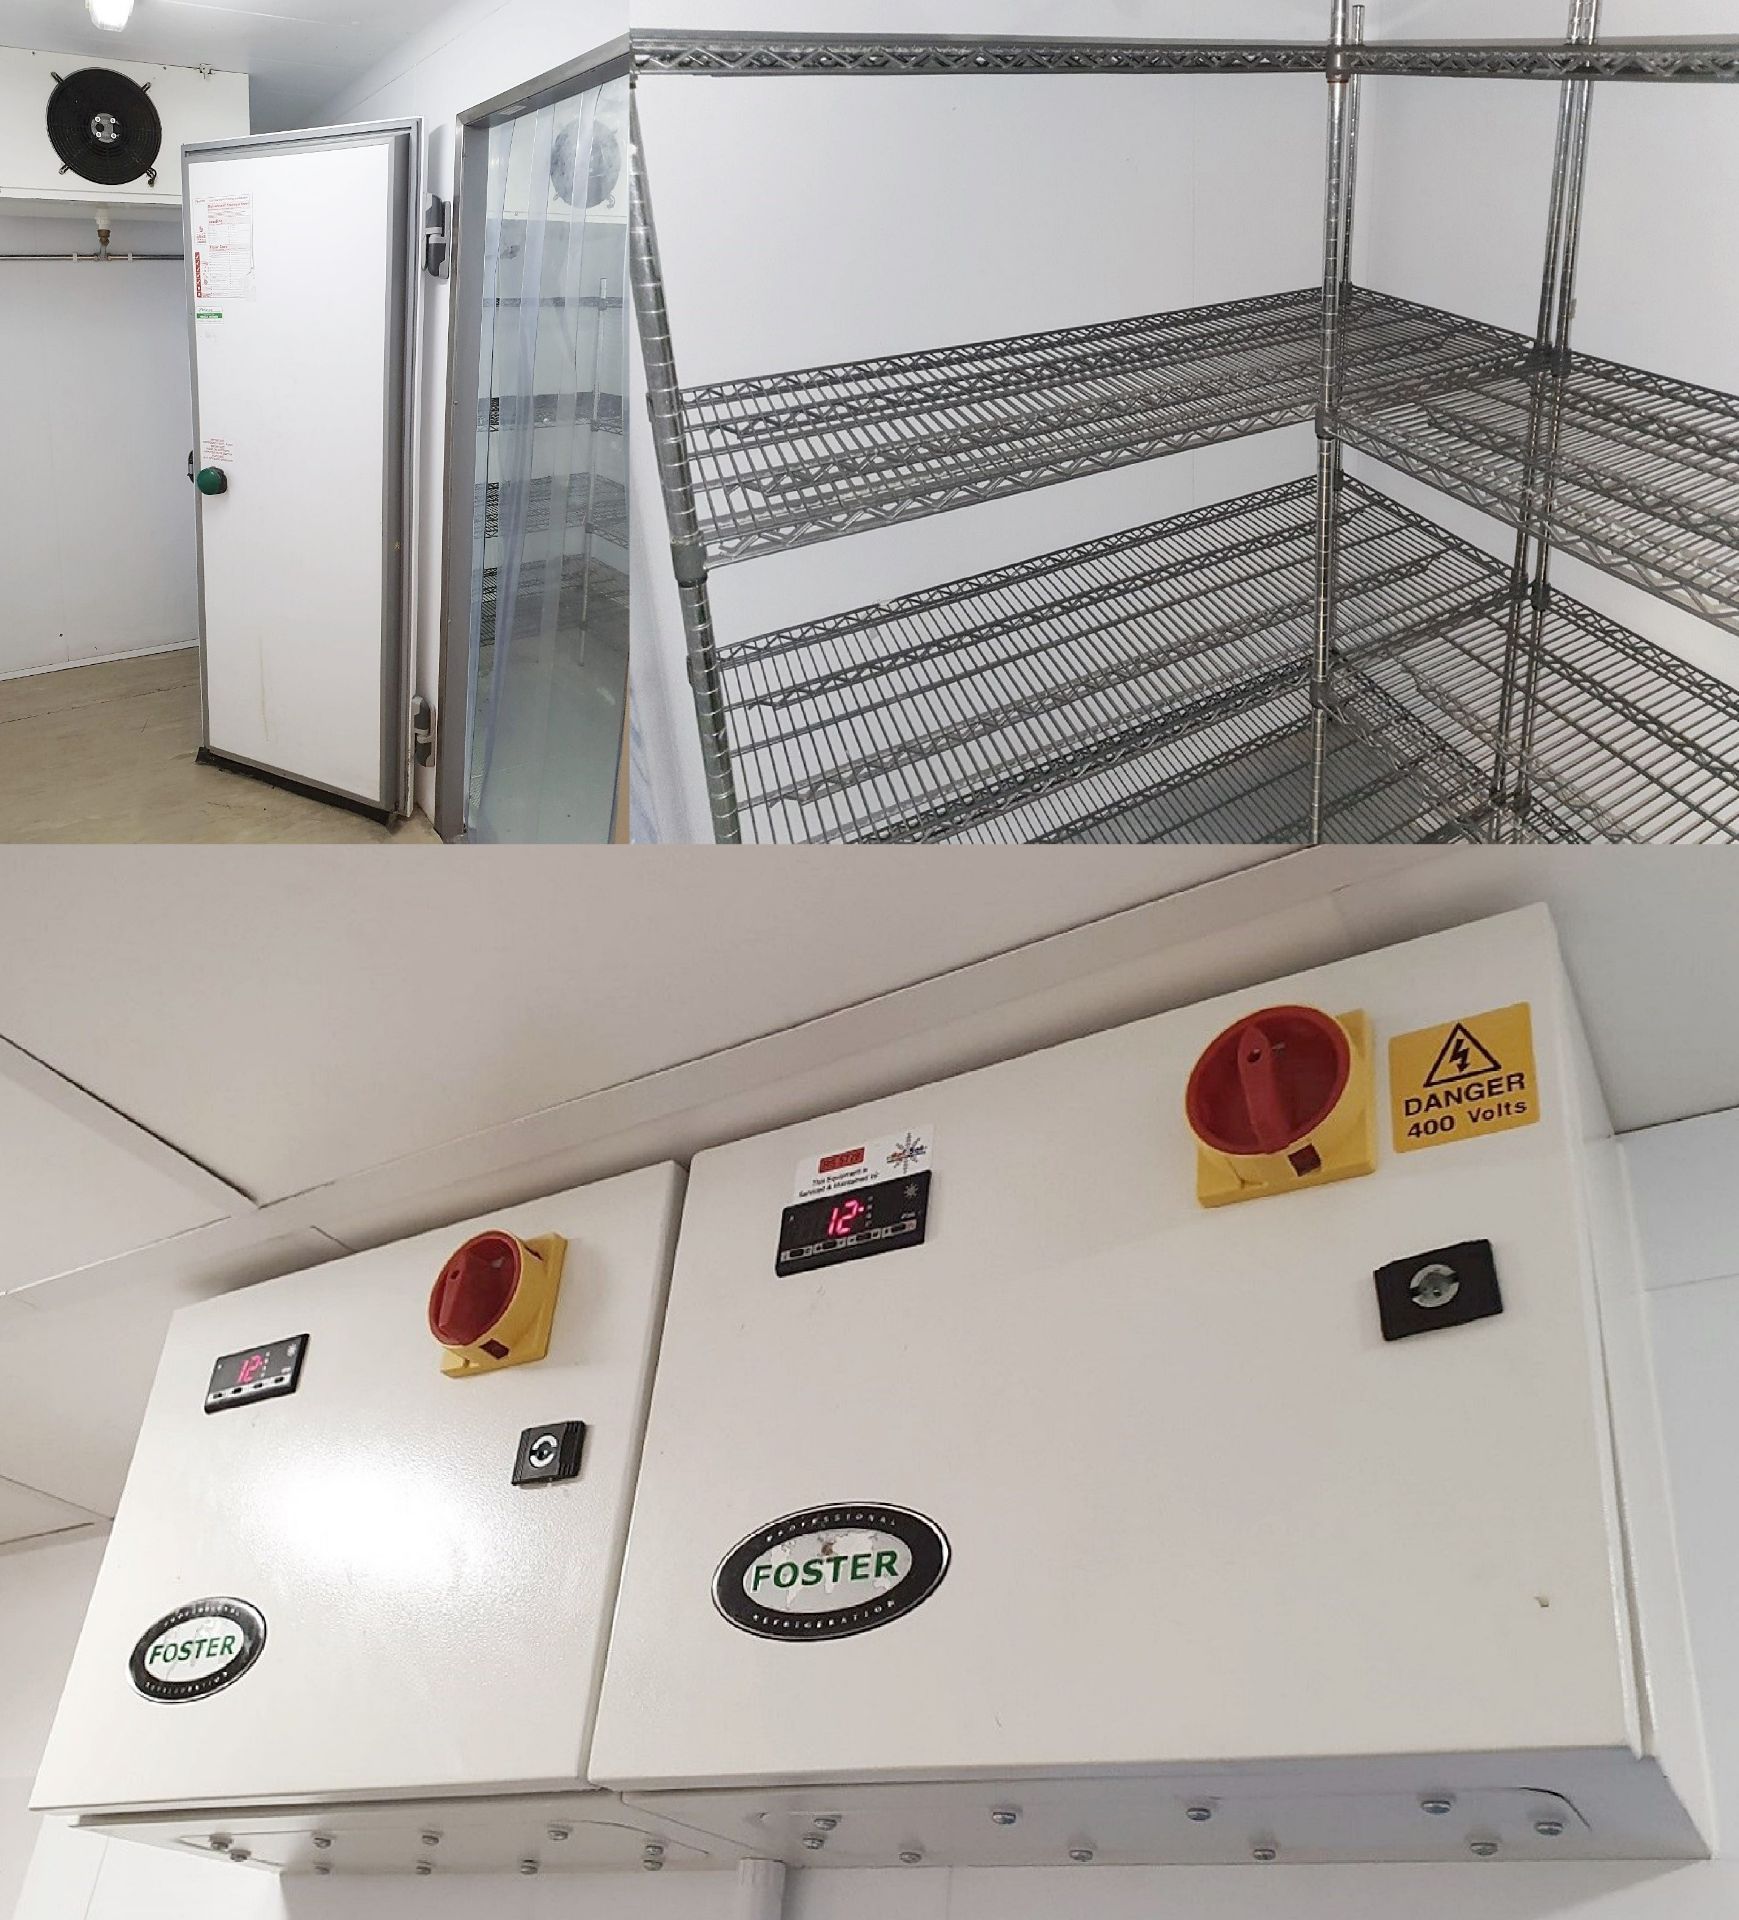 1 x Foster Walk In Double Room Freezer - Includes Doors, Wall Panels, KEC20-6L Condenser and Cold